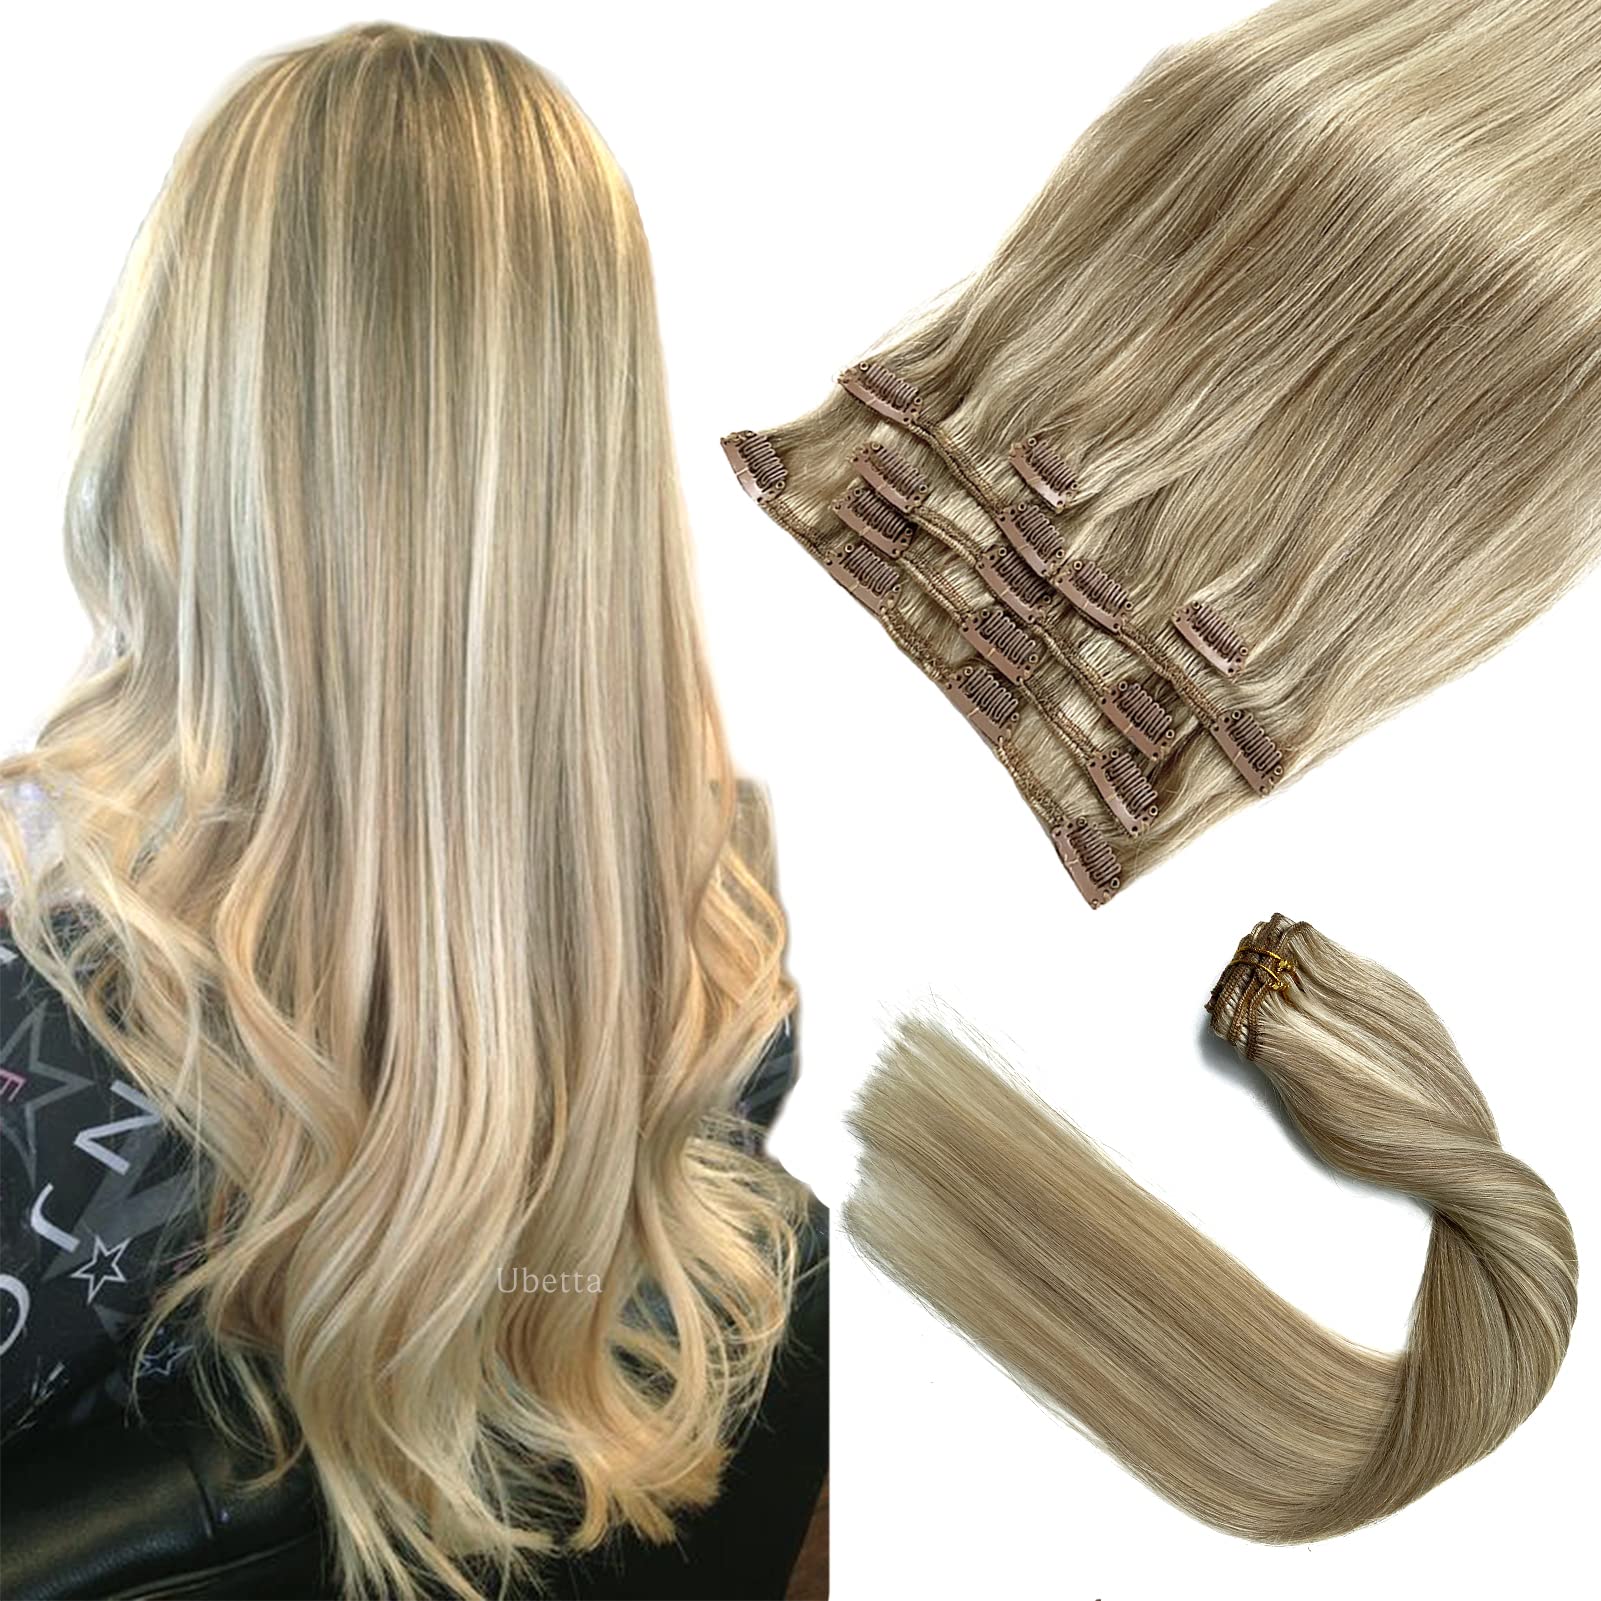 Clip in Hair Extensions Real Human Hair for Women 20inch 7pcs Black Hair Extensions 70g 100% Remy Virgin Human Hair Clip in Extensions Double Weft